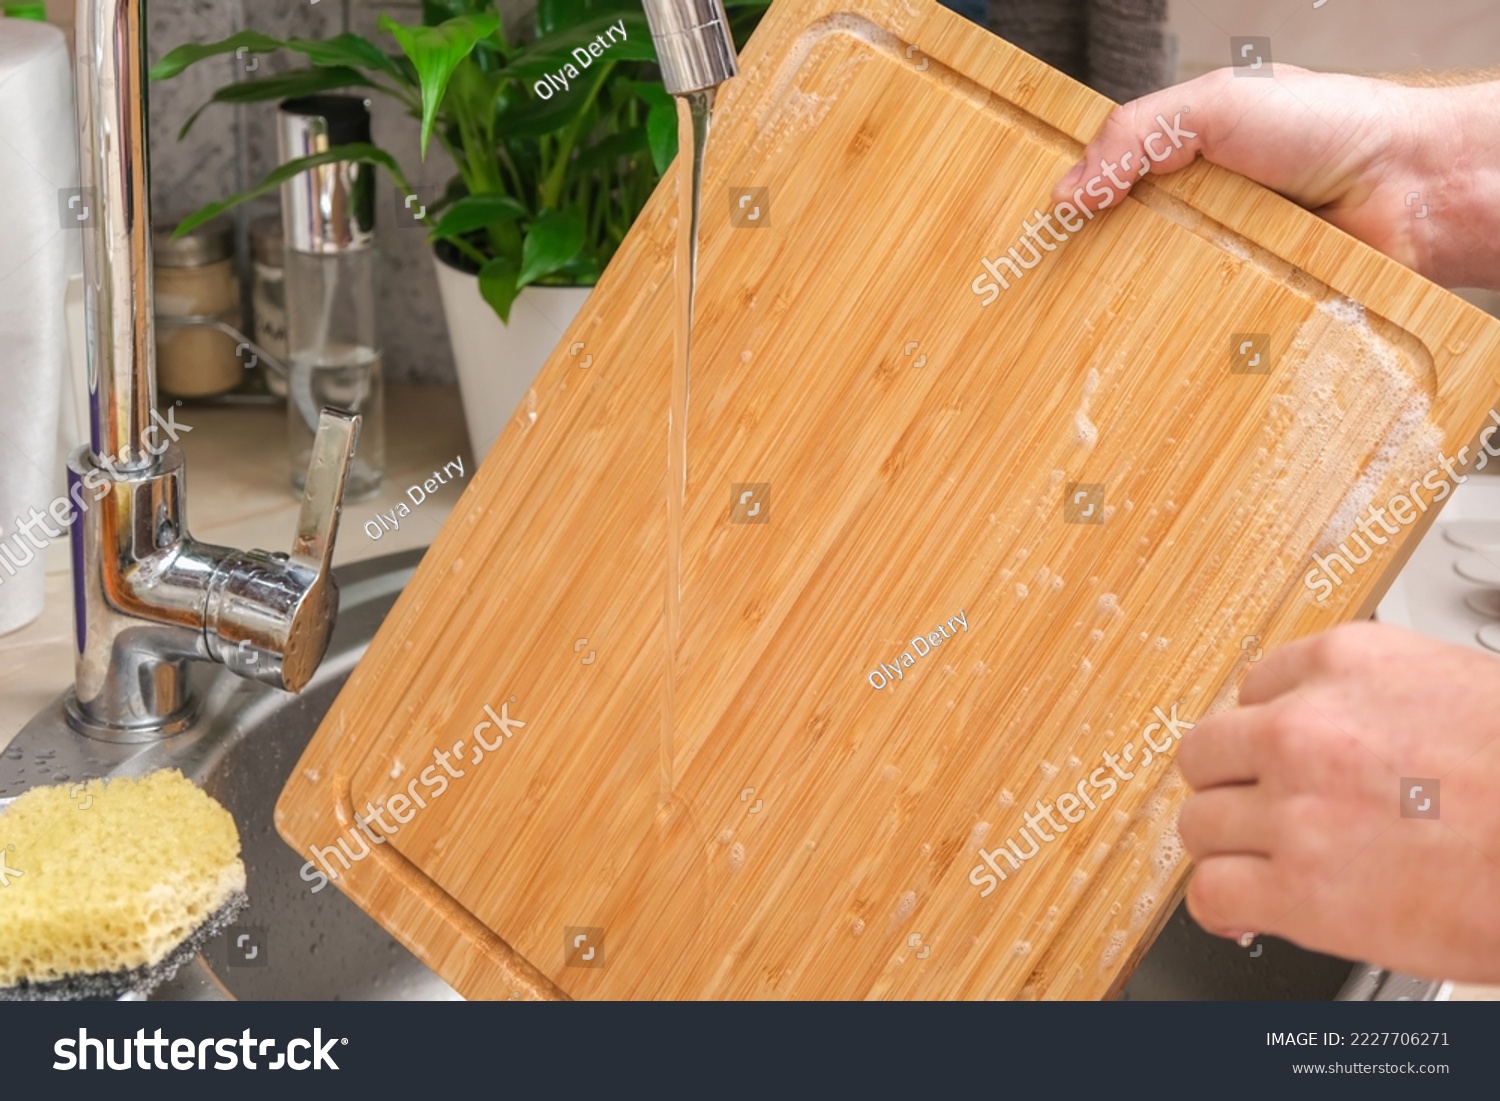 A man washes a wooden bamboo cutting board in the kitchen sink under running water. Gentle hand washing of a wooden cutting board. Cleaning dirty kitchen wood products. #2227706271